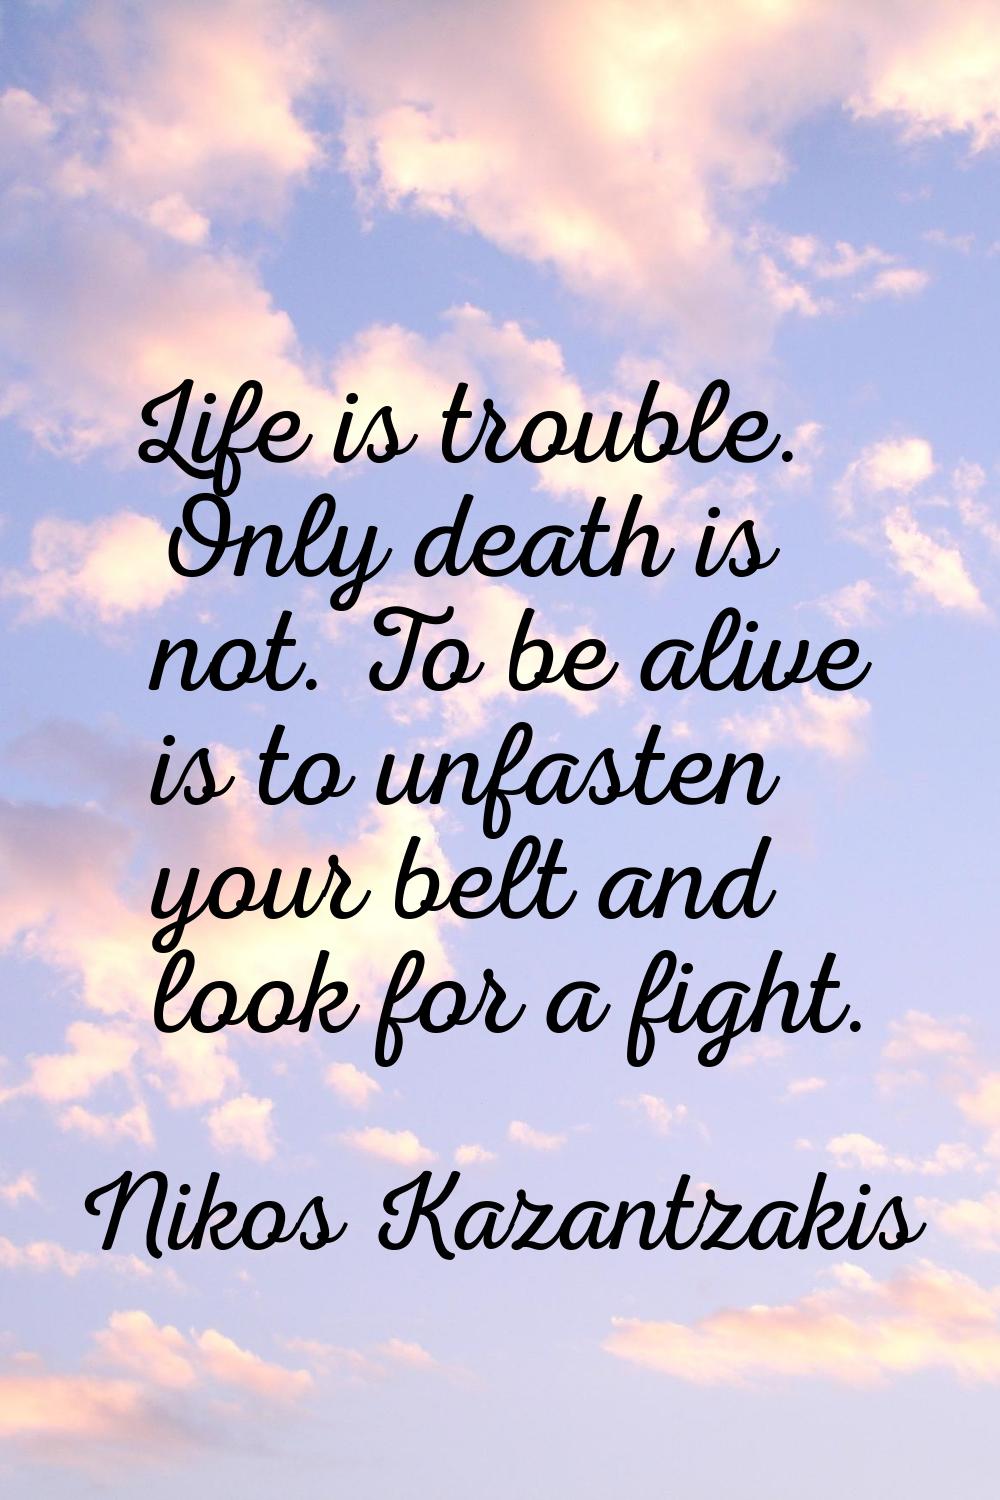 Life is trouble. Only death is not. To be alive is to unfasten your belt and look for a fight.